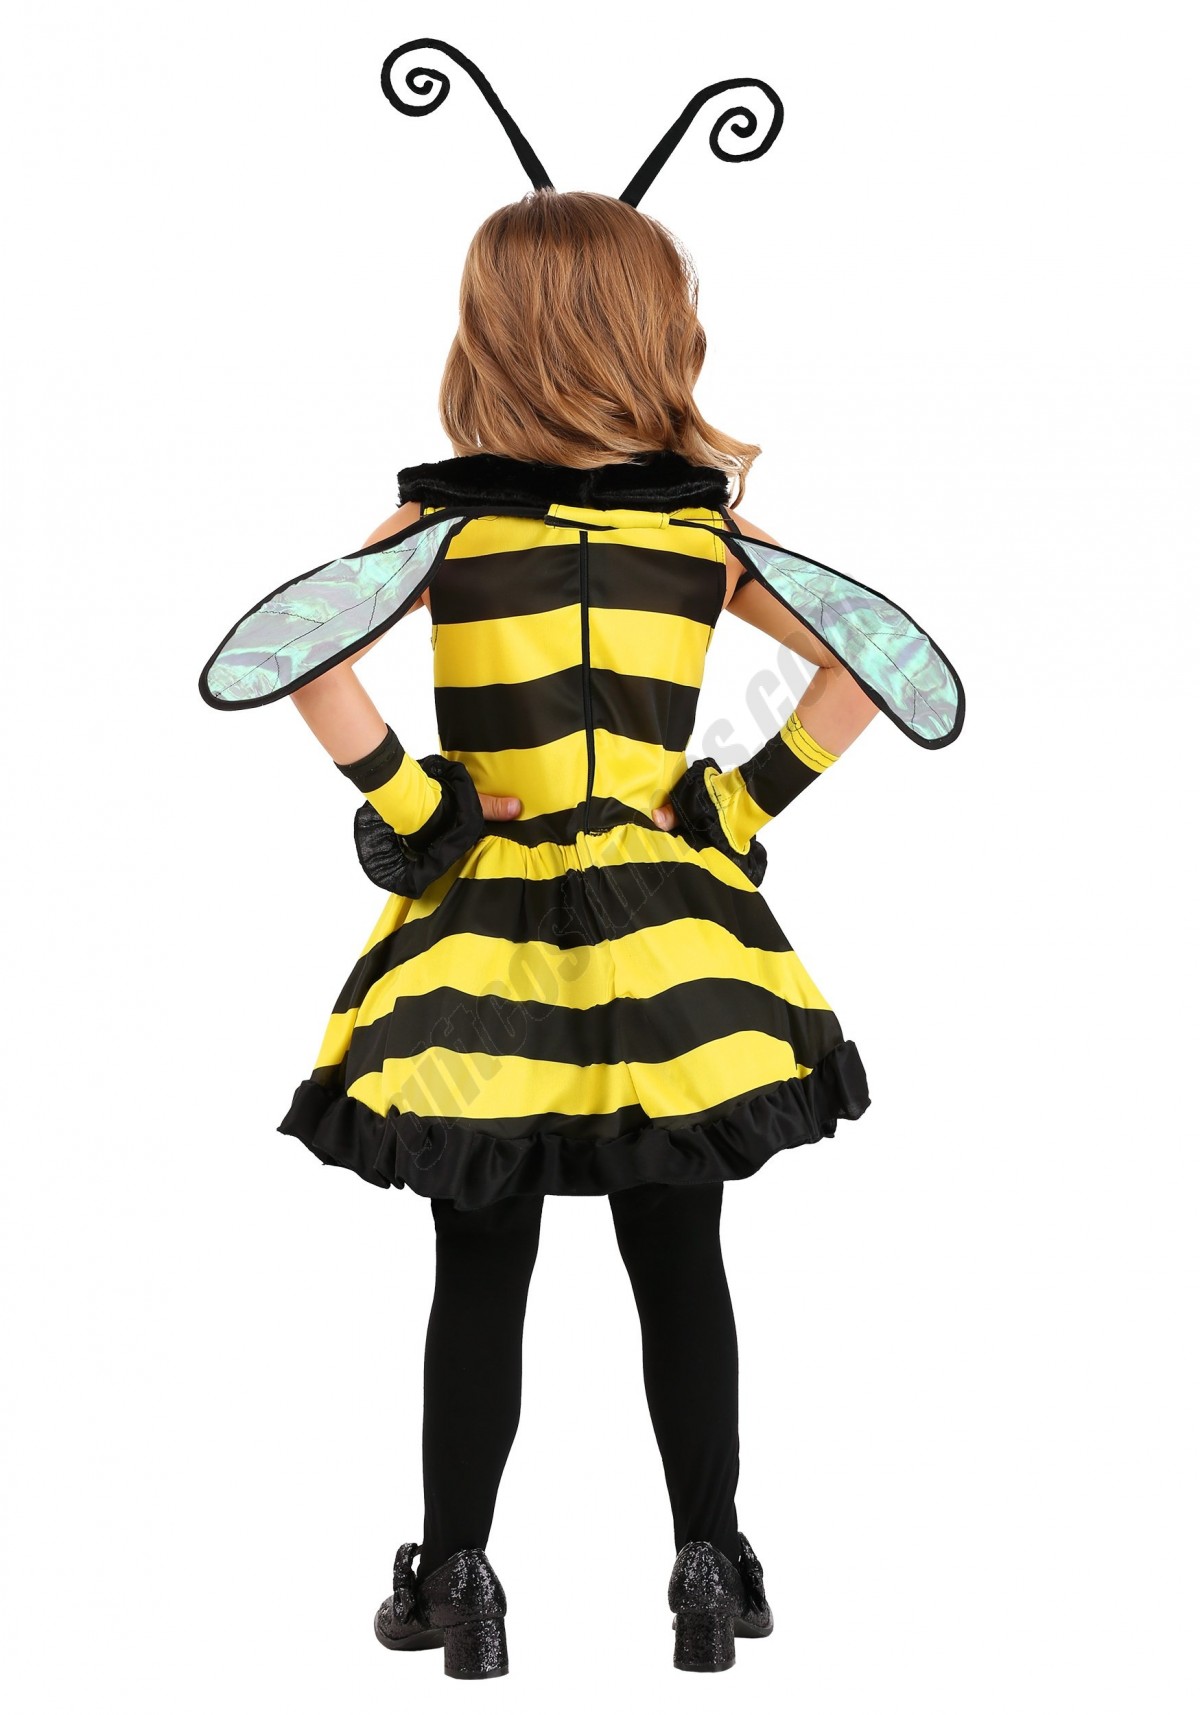 Toddler Girl's Deluxe Bumble Bee Costume Promotions - -1